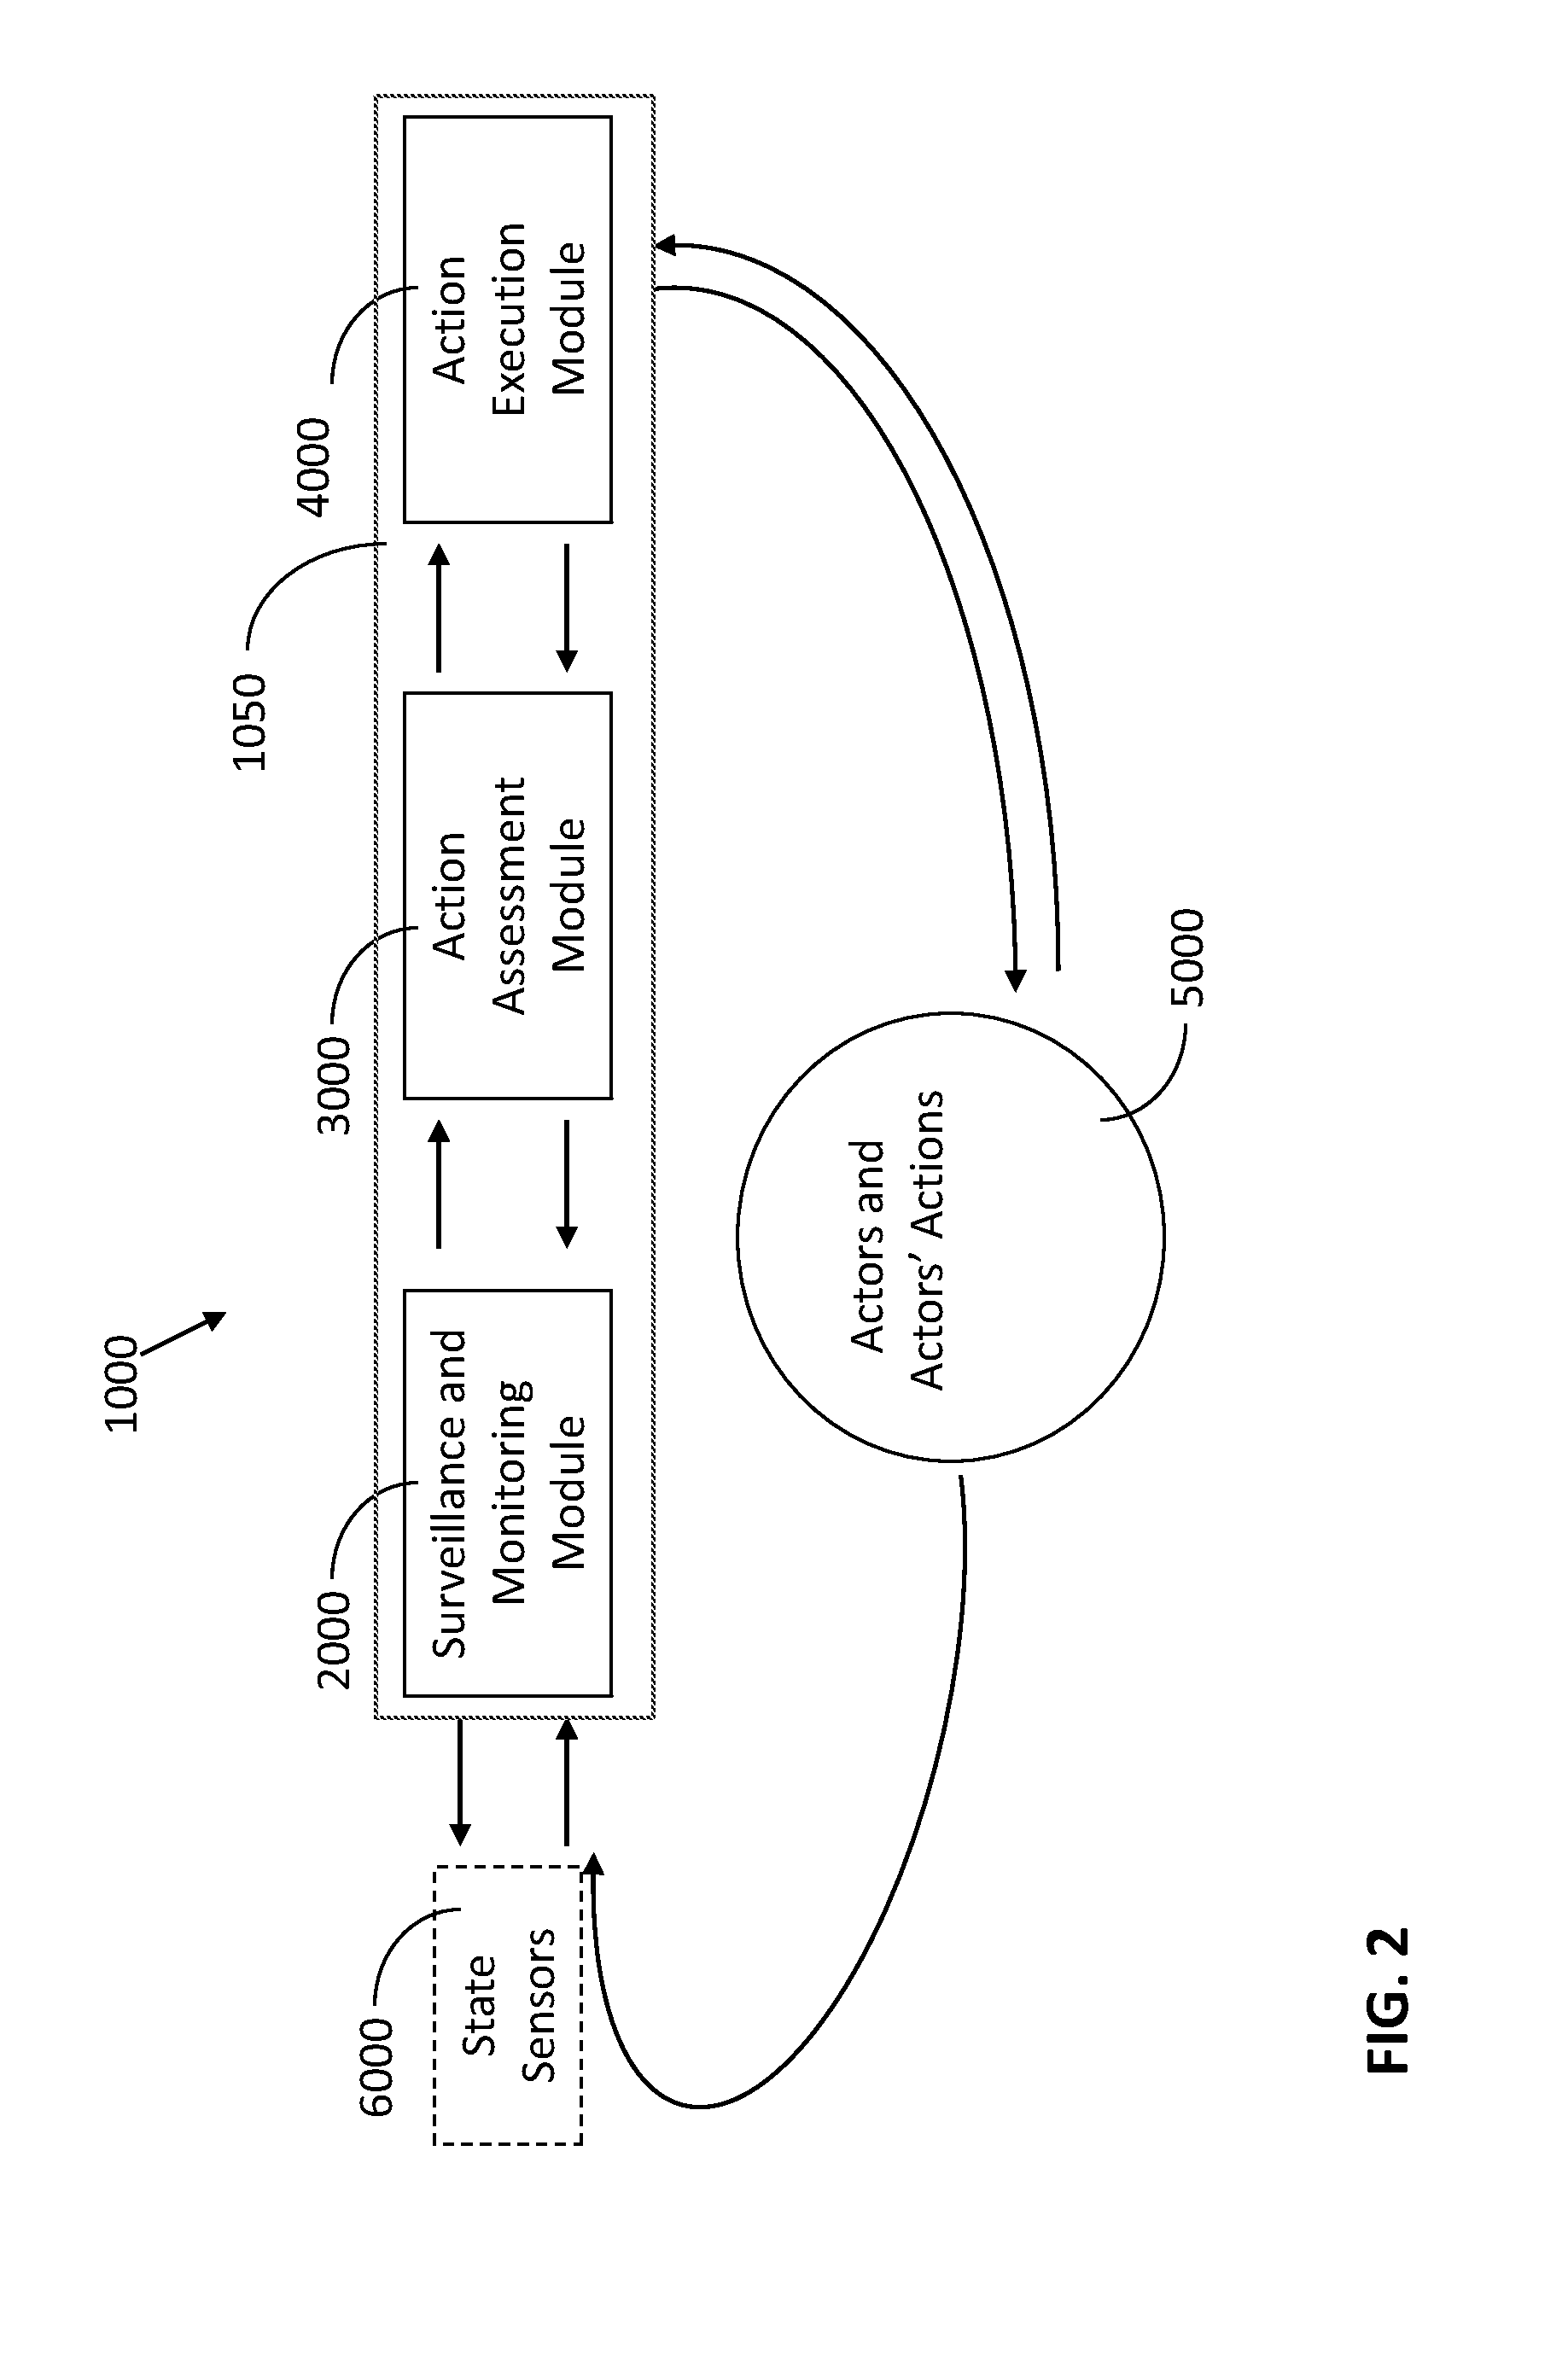 Systems and methods for comprehensive insurance loss management and loss minimization